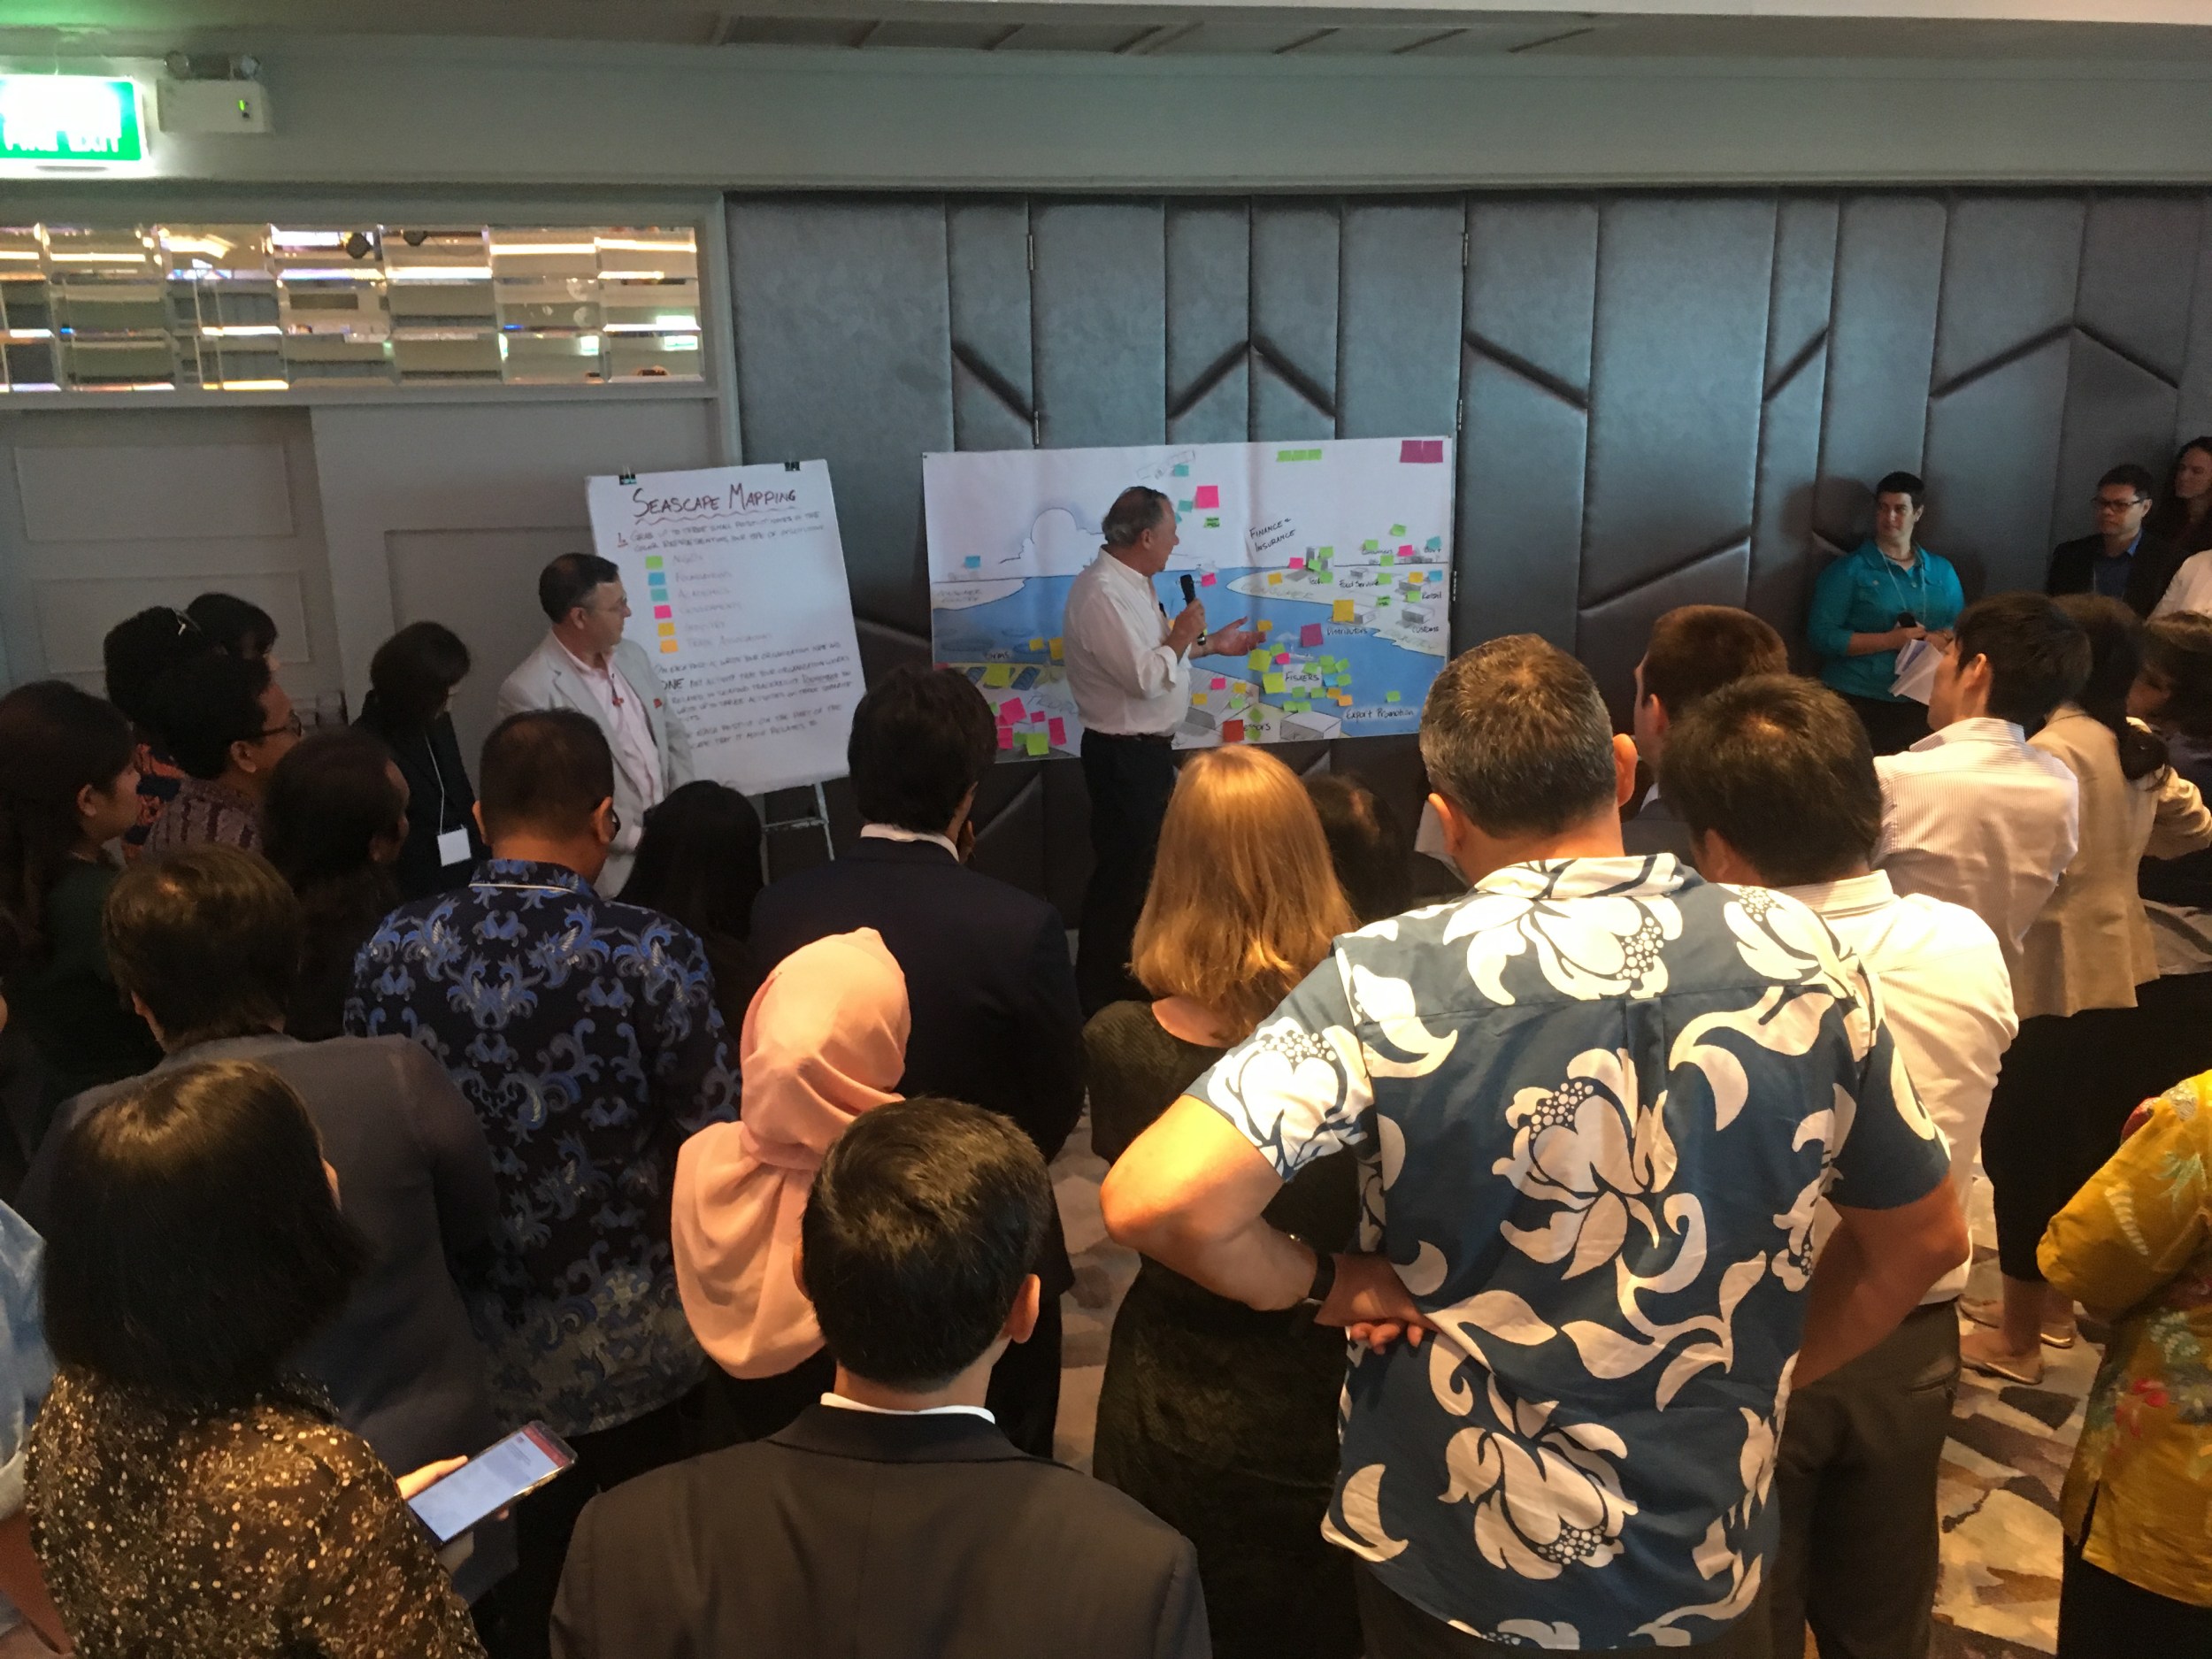 Participants at SALT's Datalab look at a drawing of the traceability seascape to discuss seascape mapping